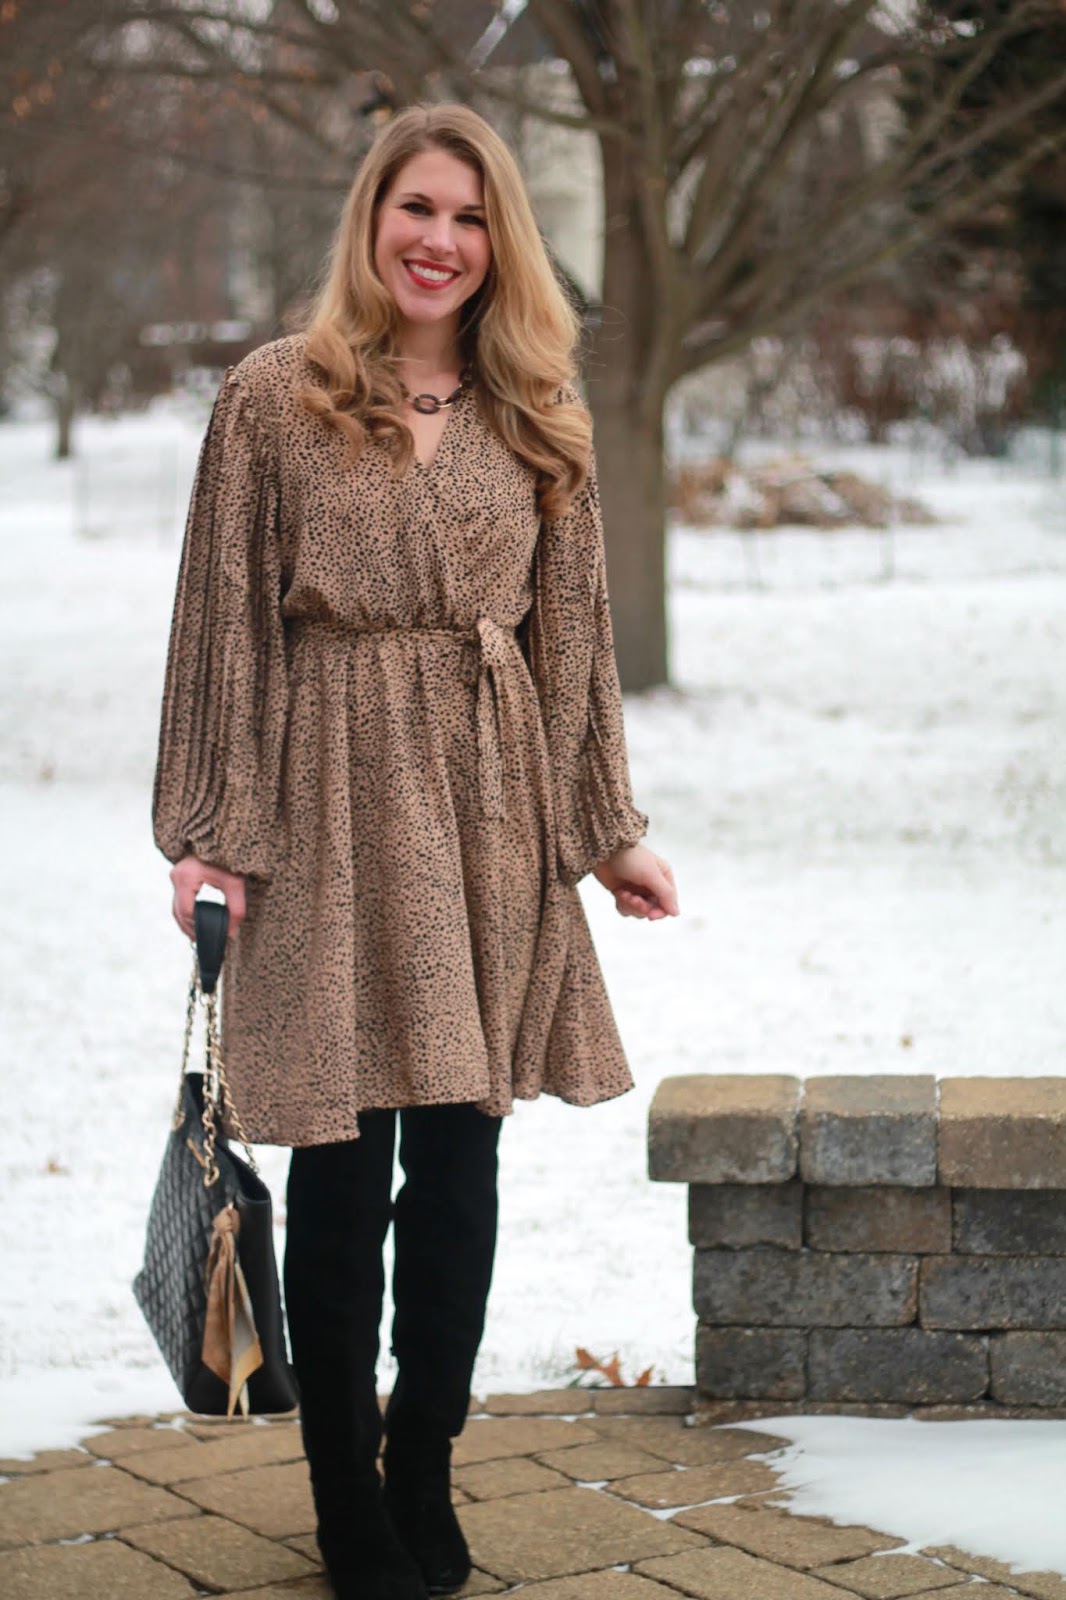 Wearing Tall Boots with Dresses & Confident Twosday Linkup